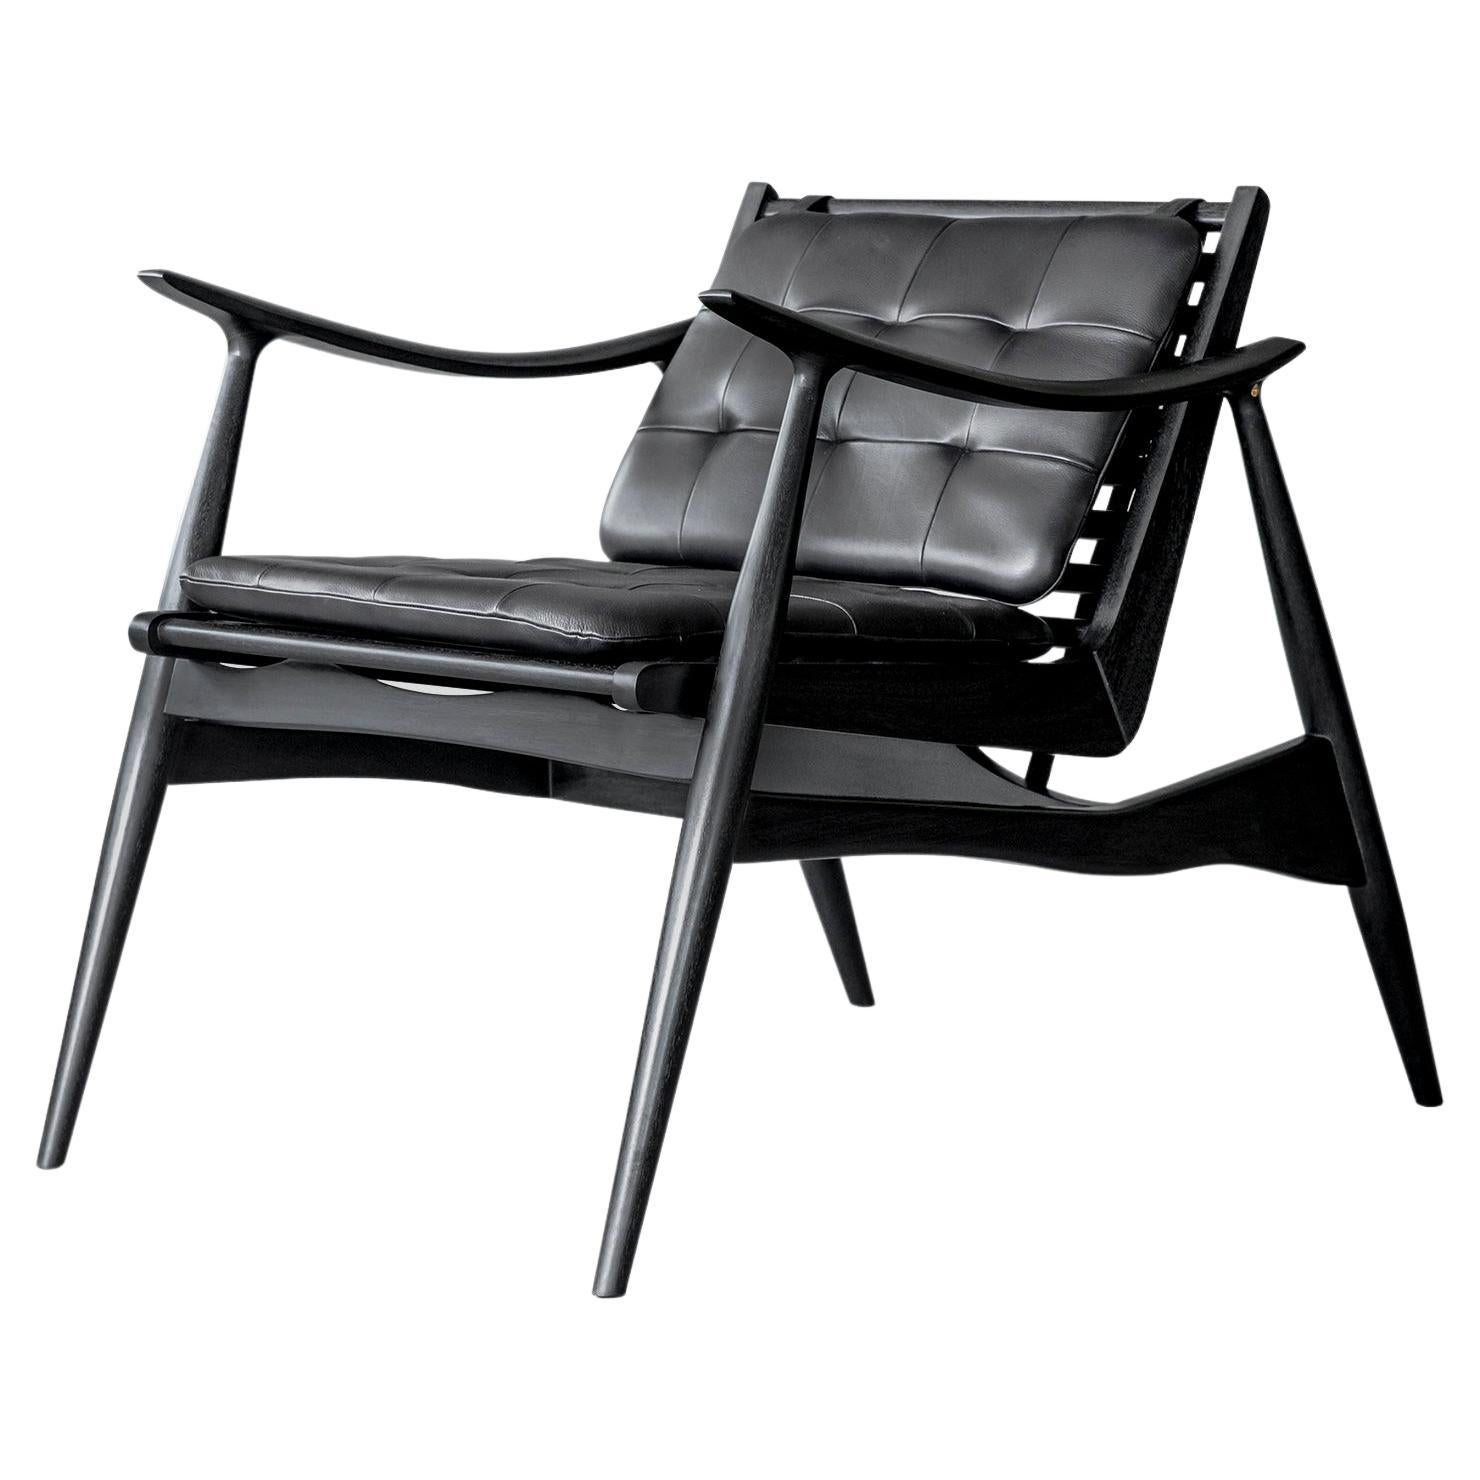 Black Atra Lounge Chair by Atra Design For Sale